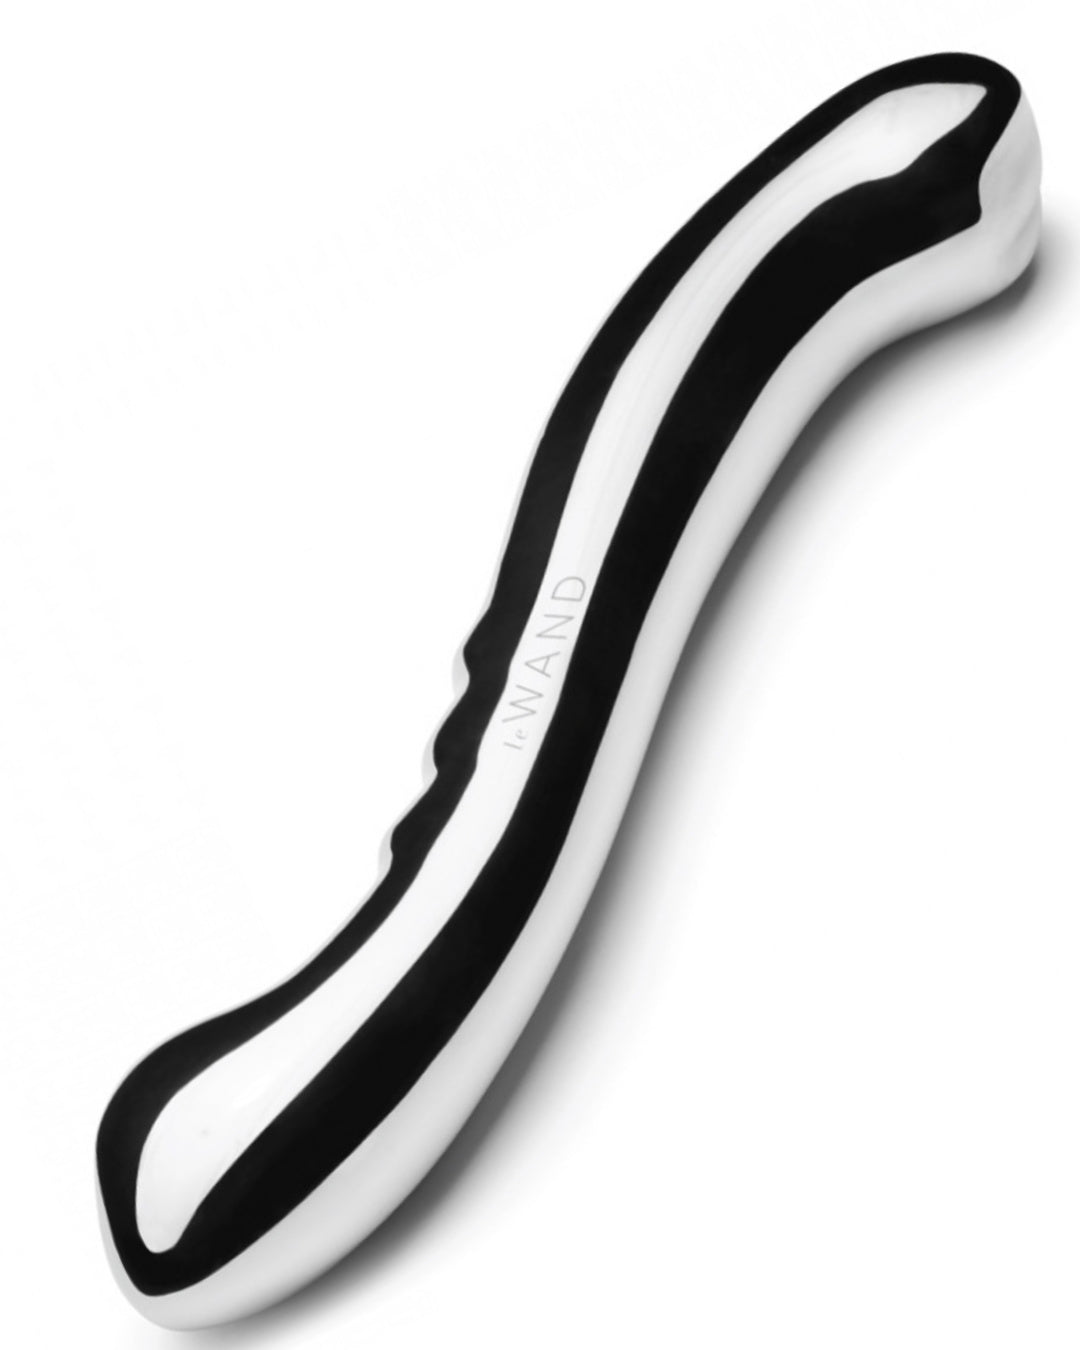 Le Wand Contour Double Ended Stainless Steel Dildo against a white background, side view to show the curve and ends